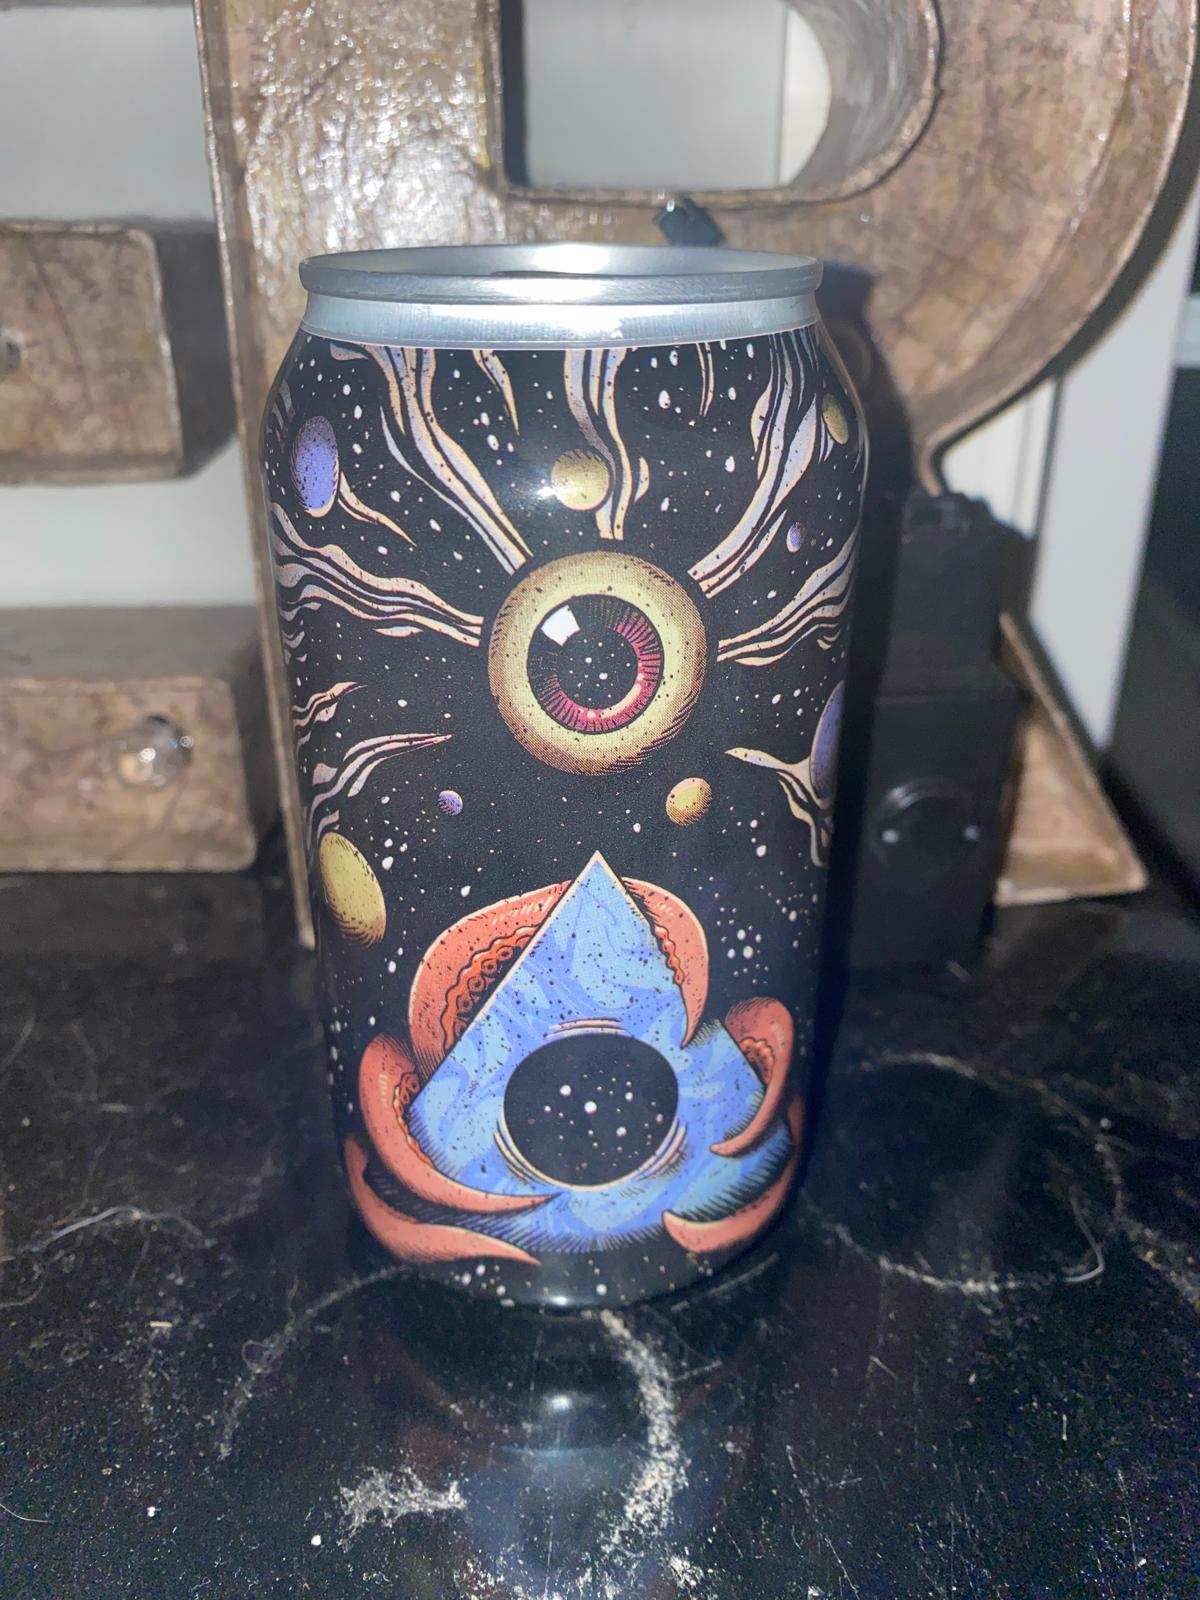 Origin of Darkness (Collaboration with Lervig Brewing)